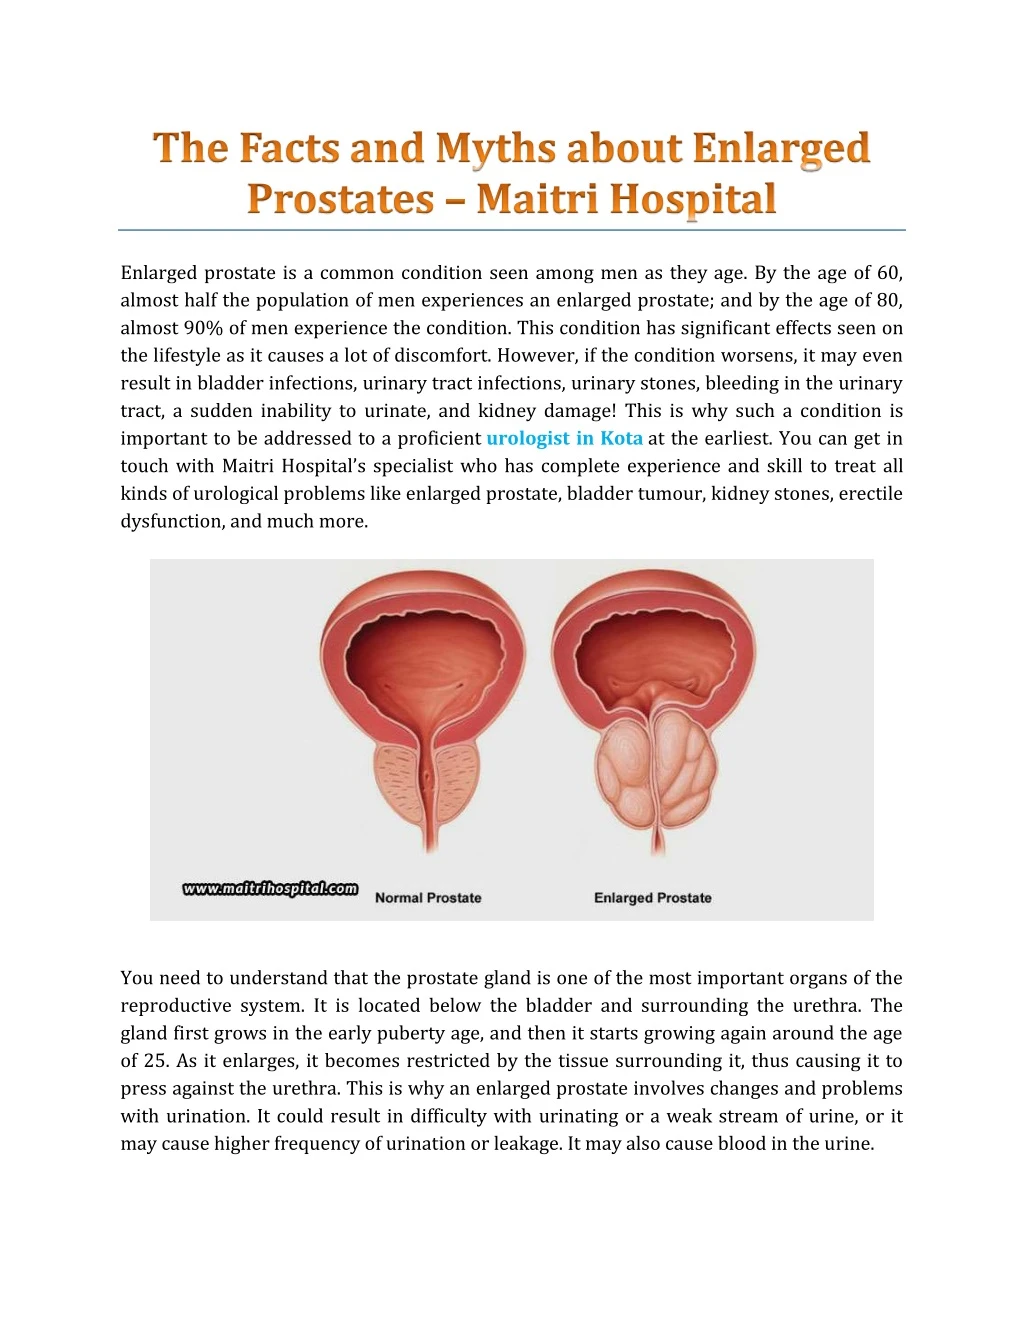 enlarged prostate is a common condition seen